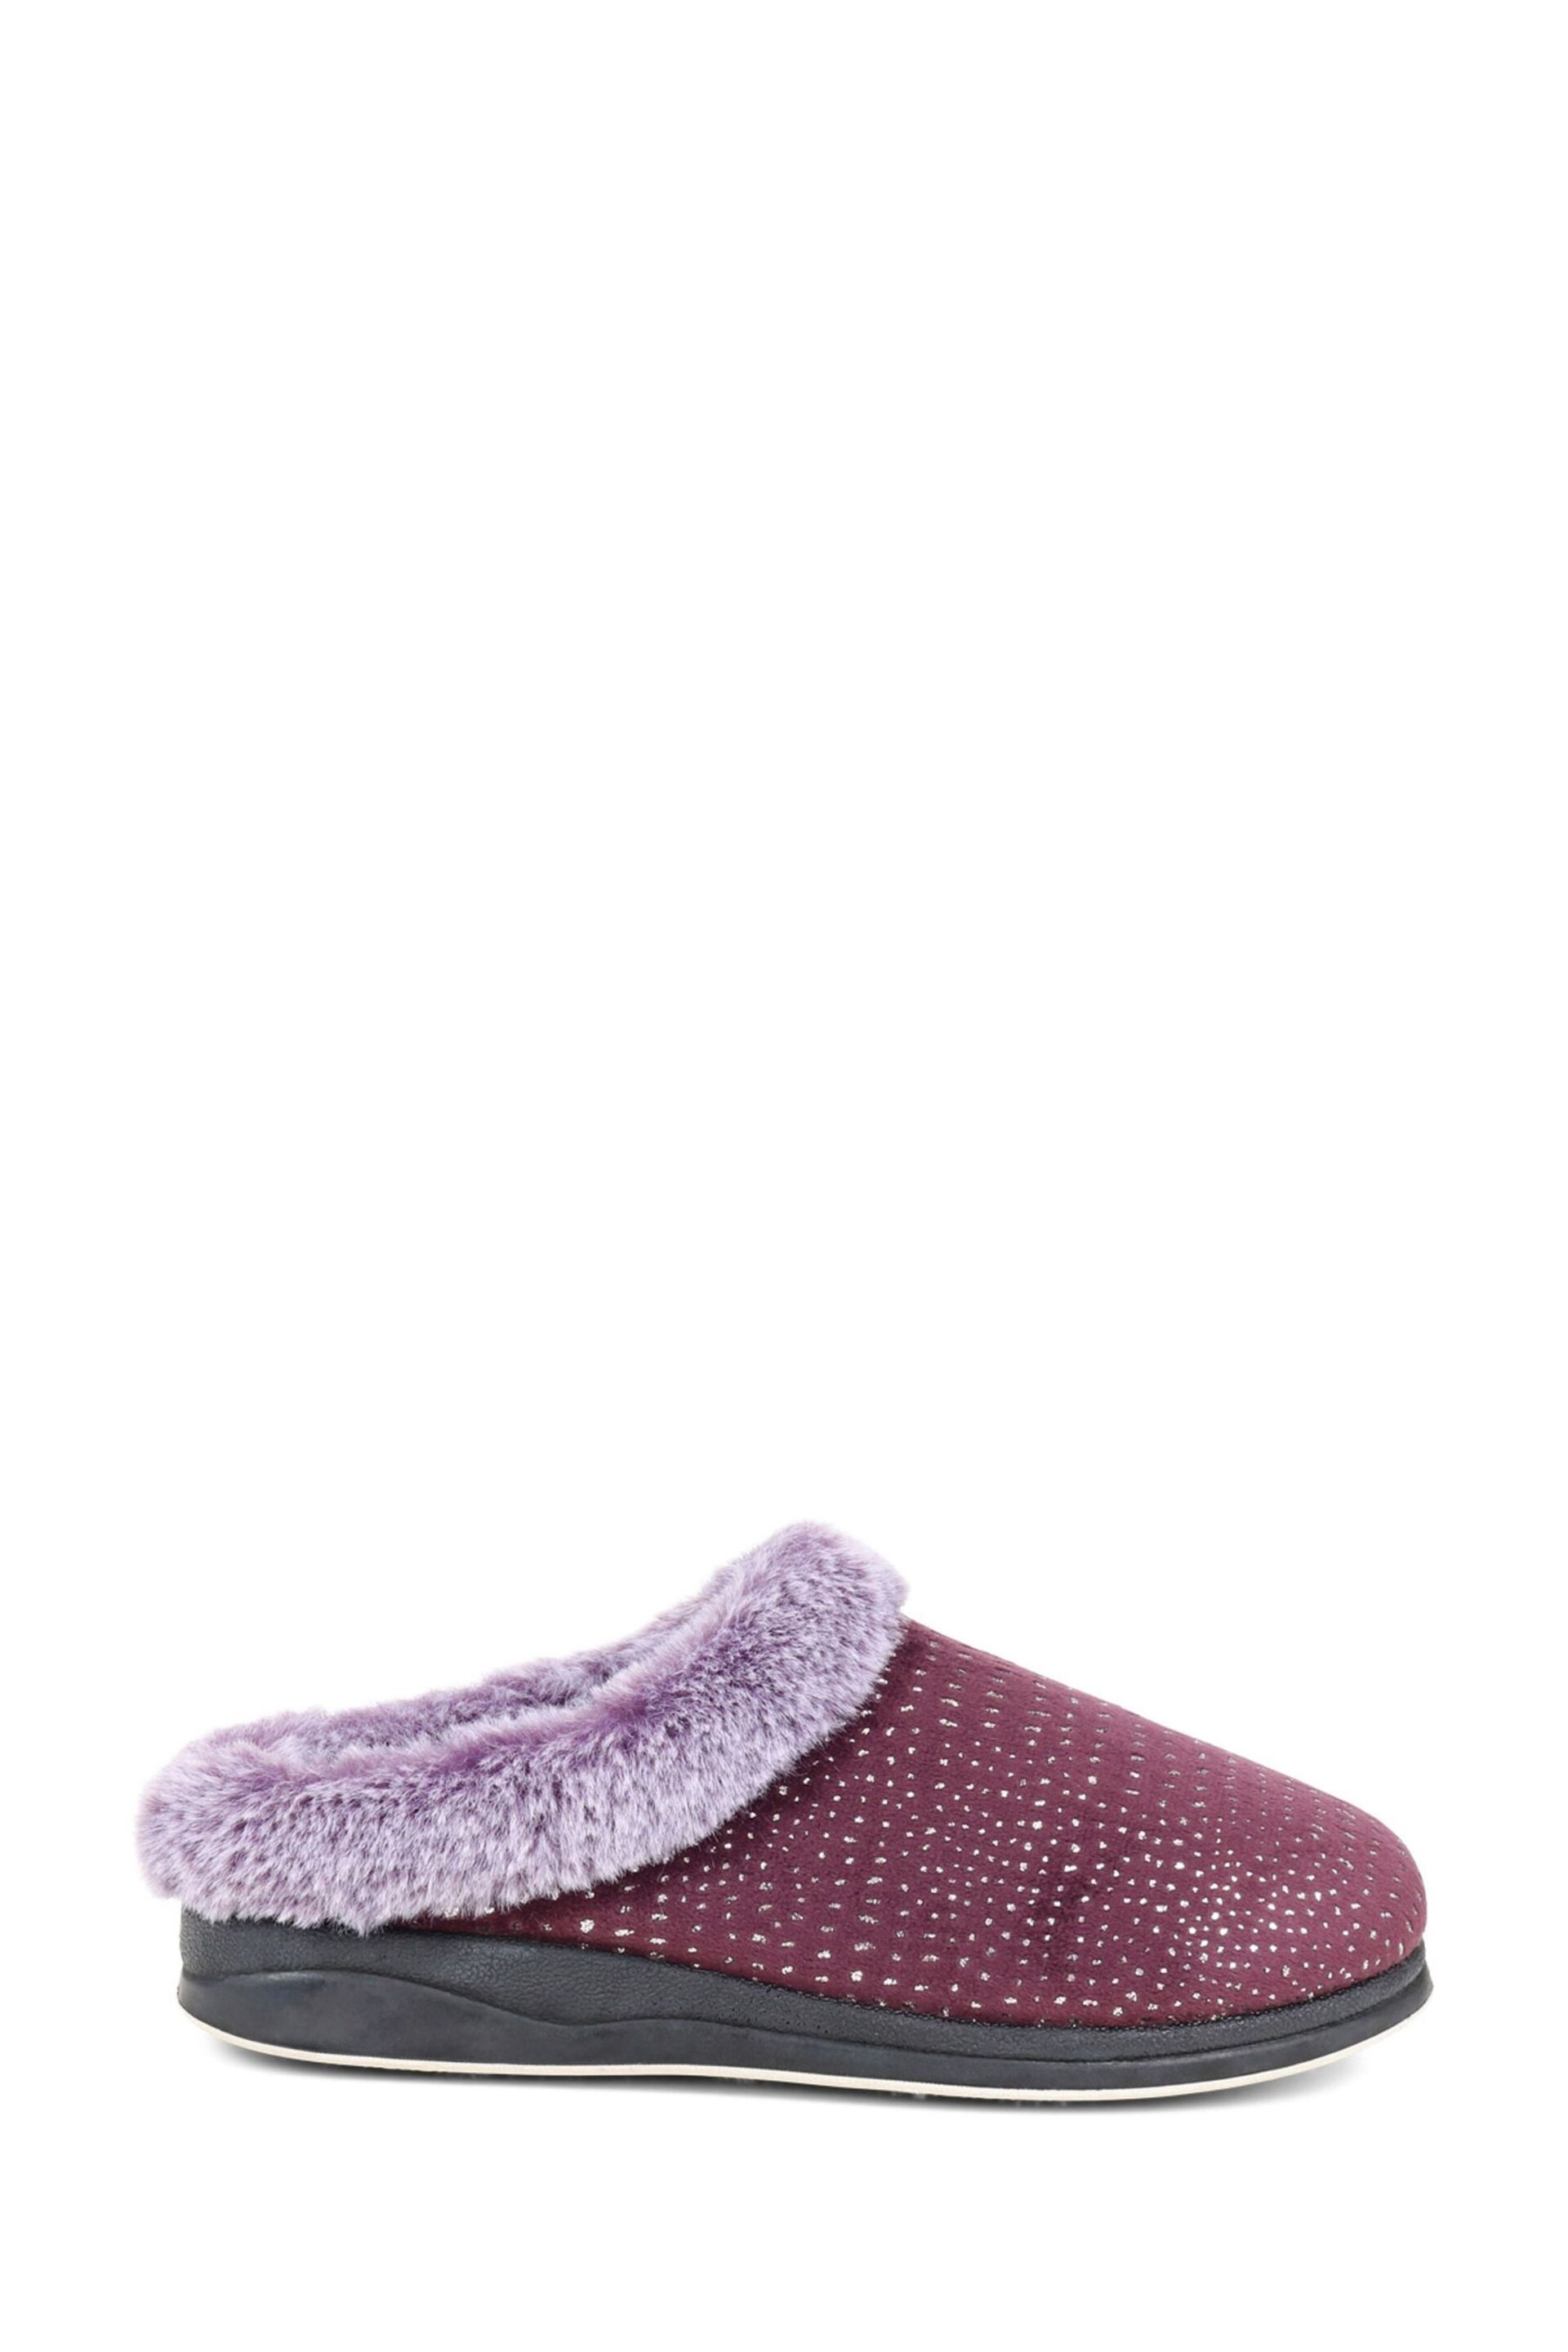 Pavers Purple Patterned Full Slippers - Image 1 of 5